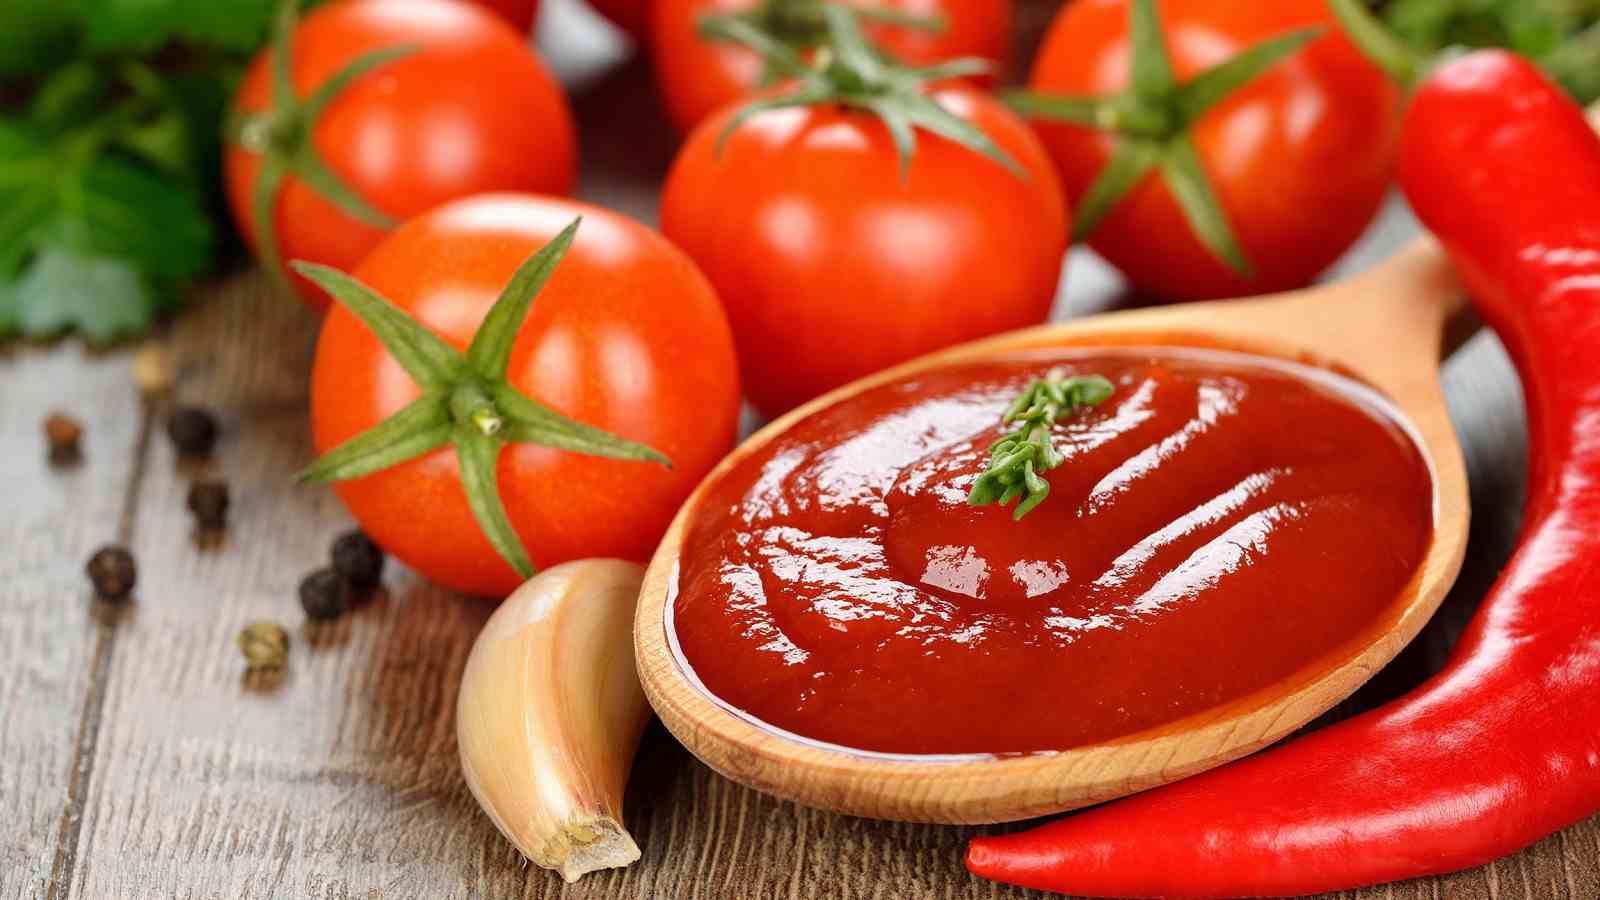 Can tomato paste be substituted for tomato sauce